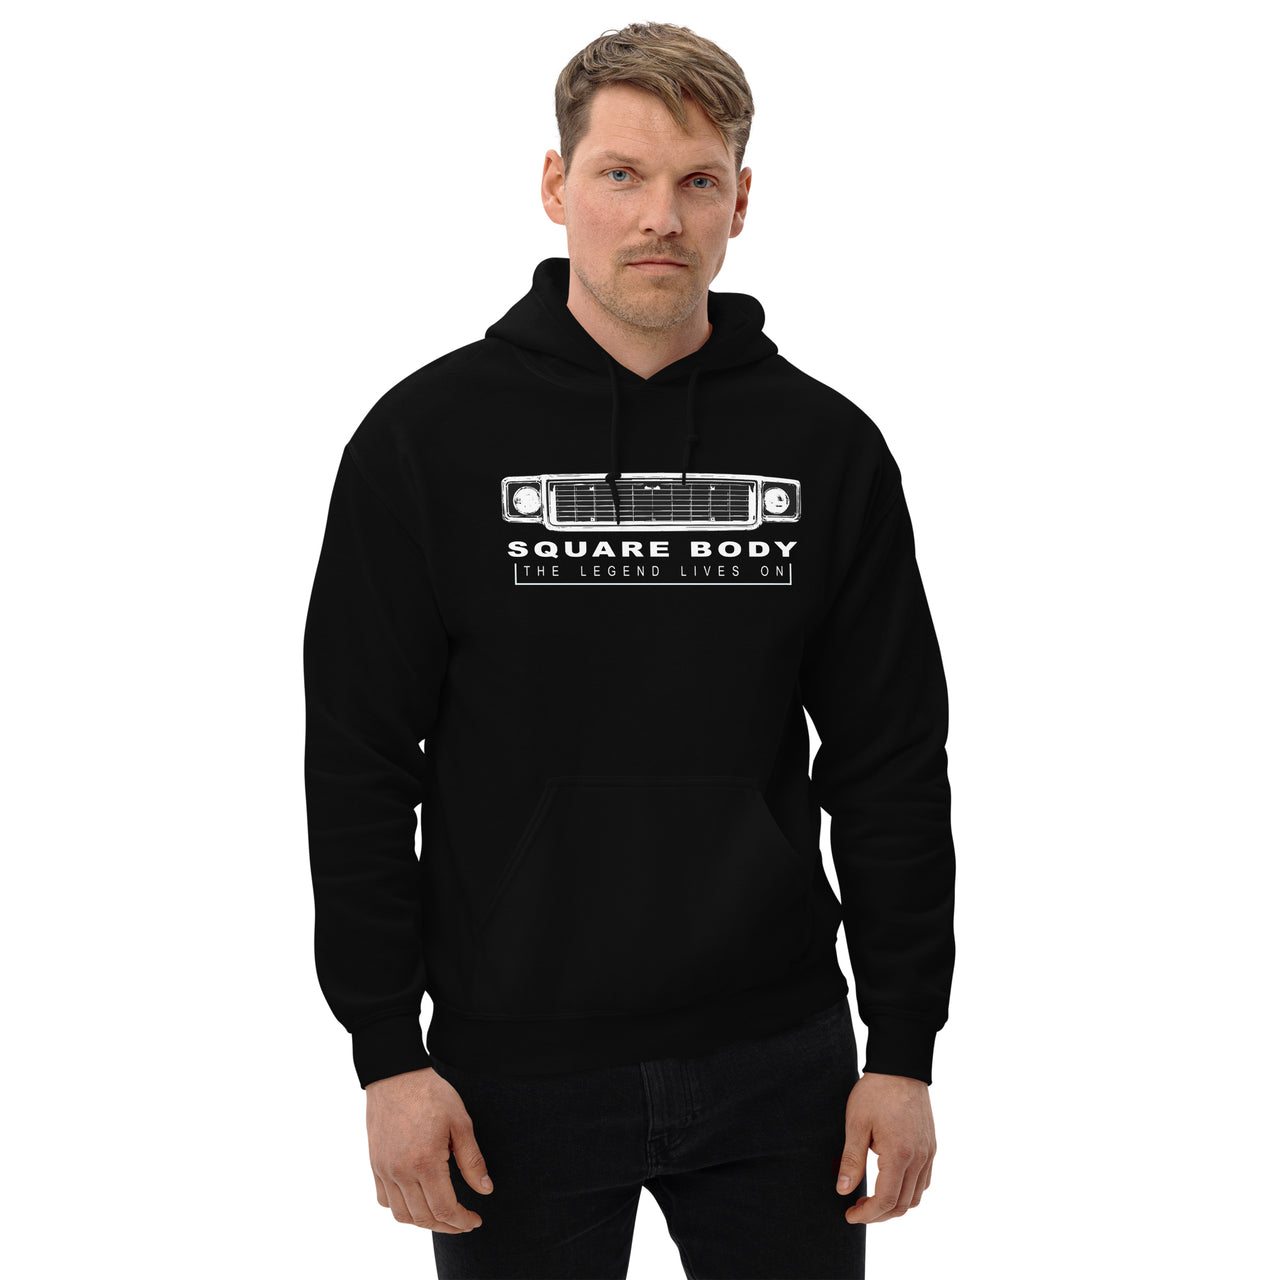 70s Square Body The Legend Lives On Hoodie modeled in black